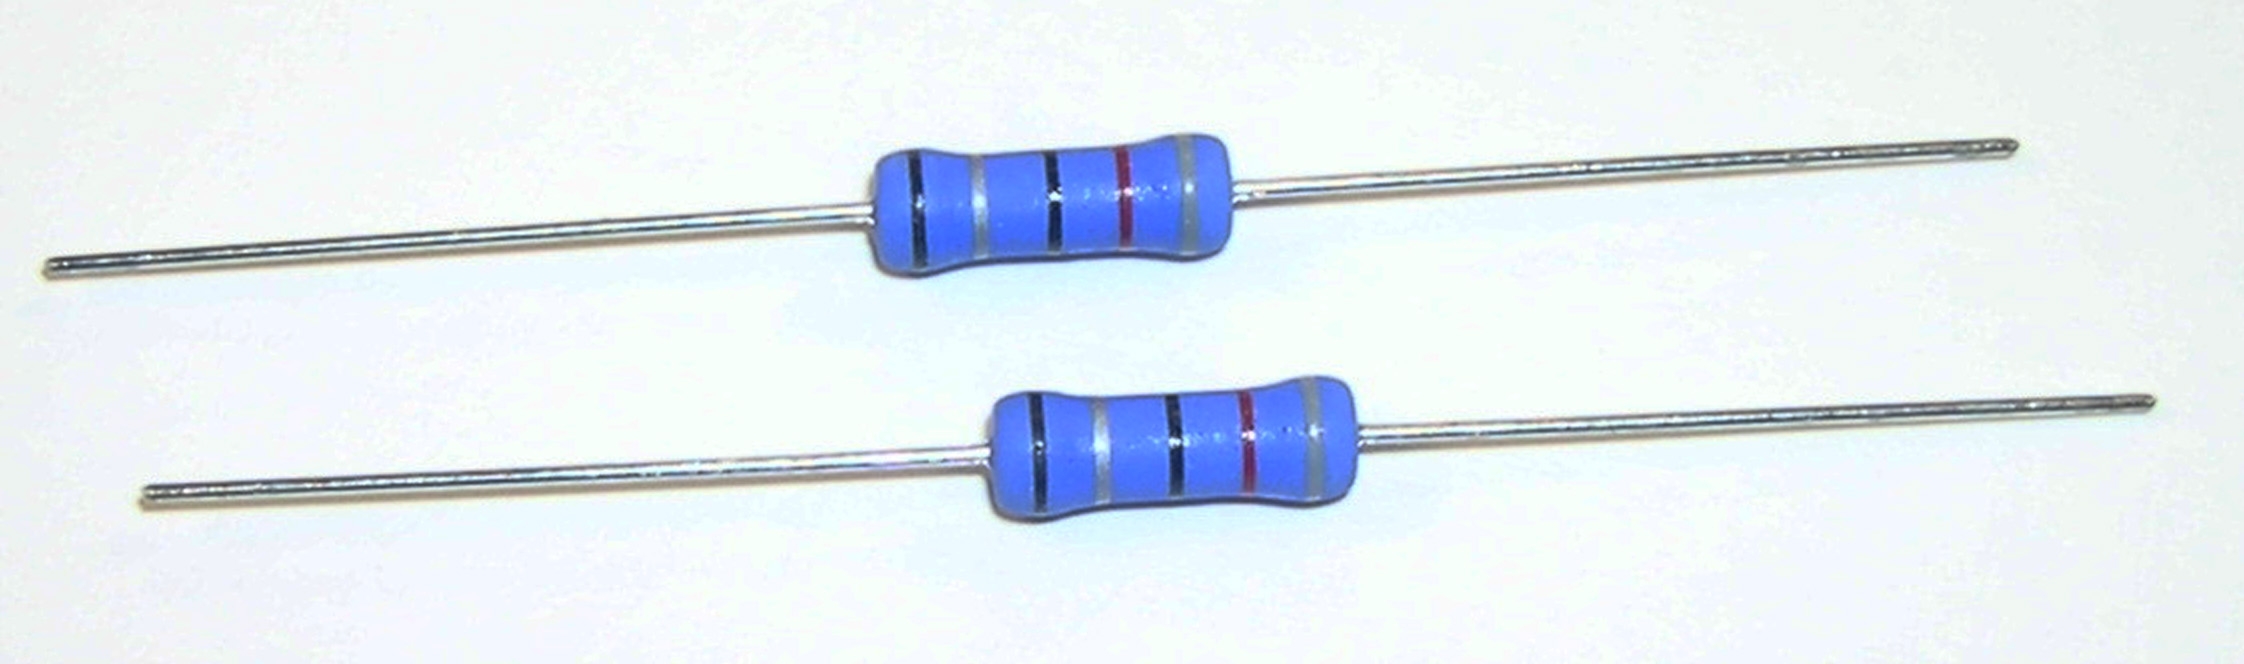 Axial Leaded Resistors Offer High Pulse Voltage Capability